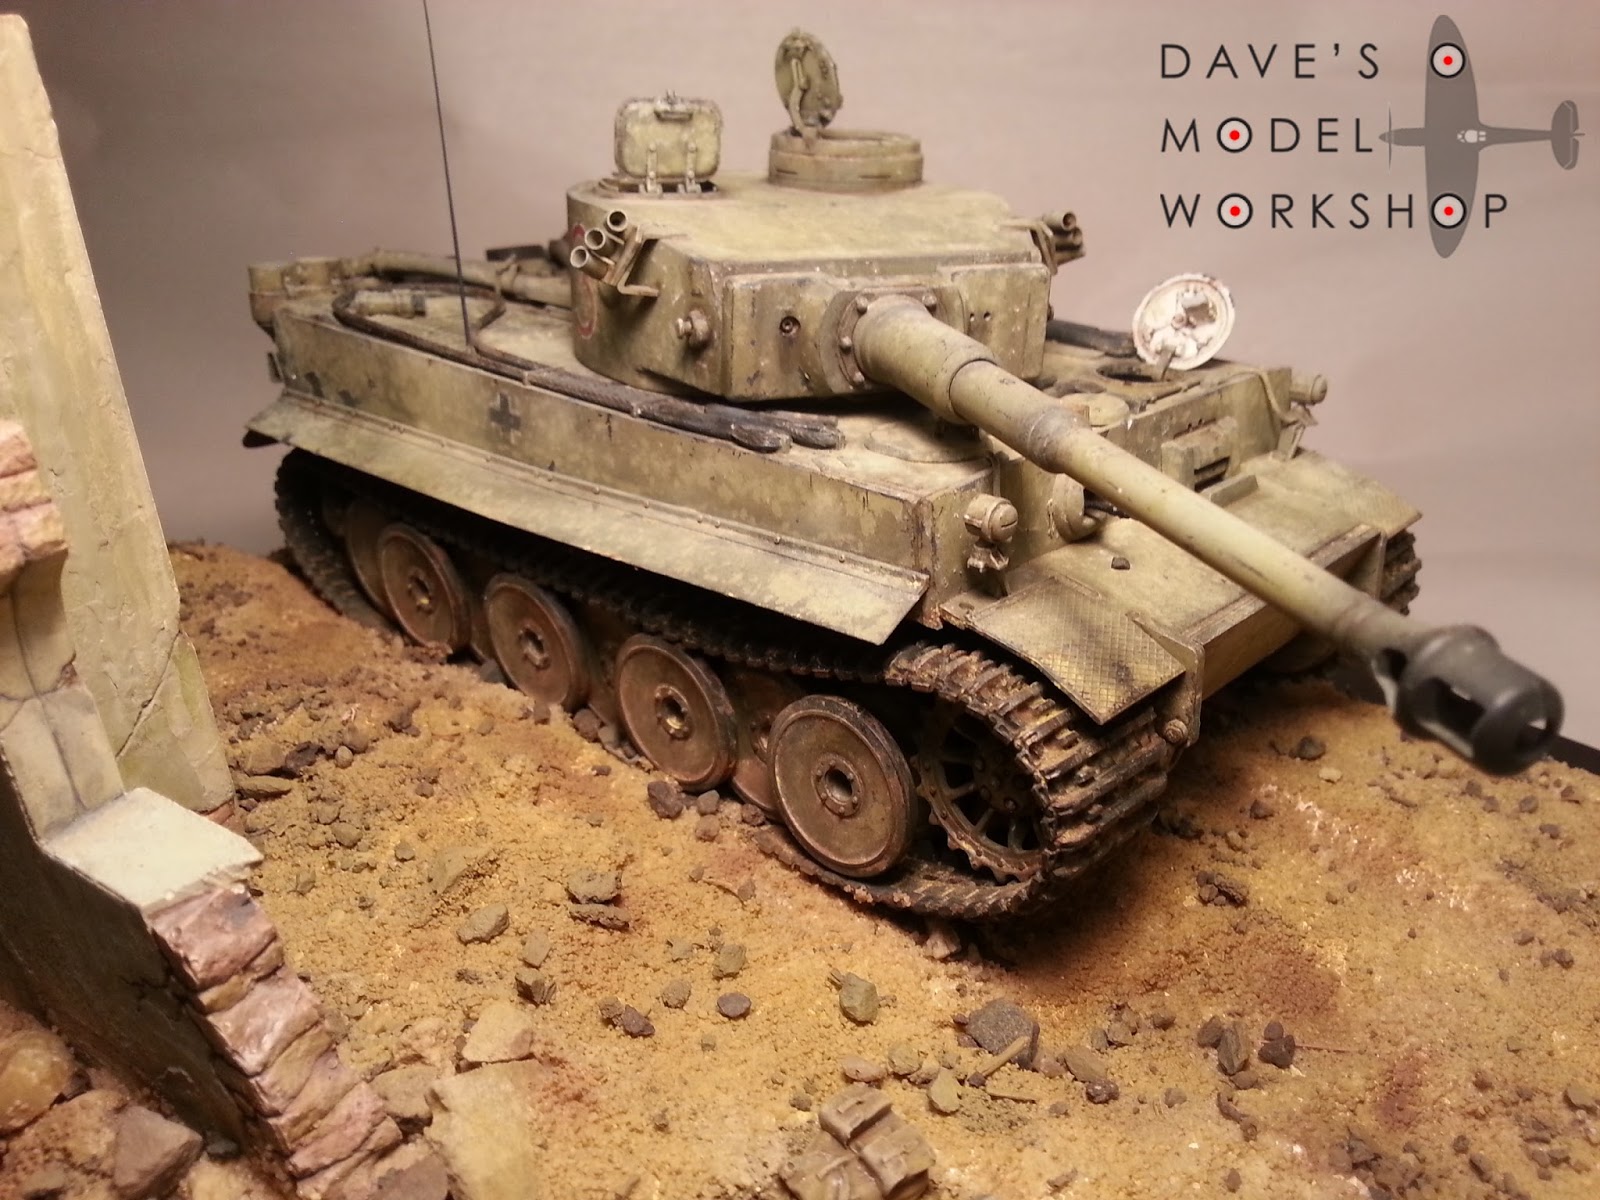 Dave S Model Workshop Video Tutorial How To Add A Desert Sand Texture To Diorama Groundwork Part Ii Rocks And Painting,Best Dishwasher